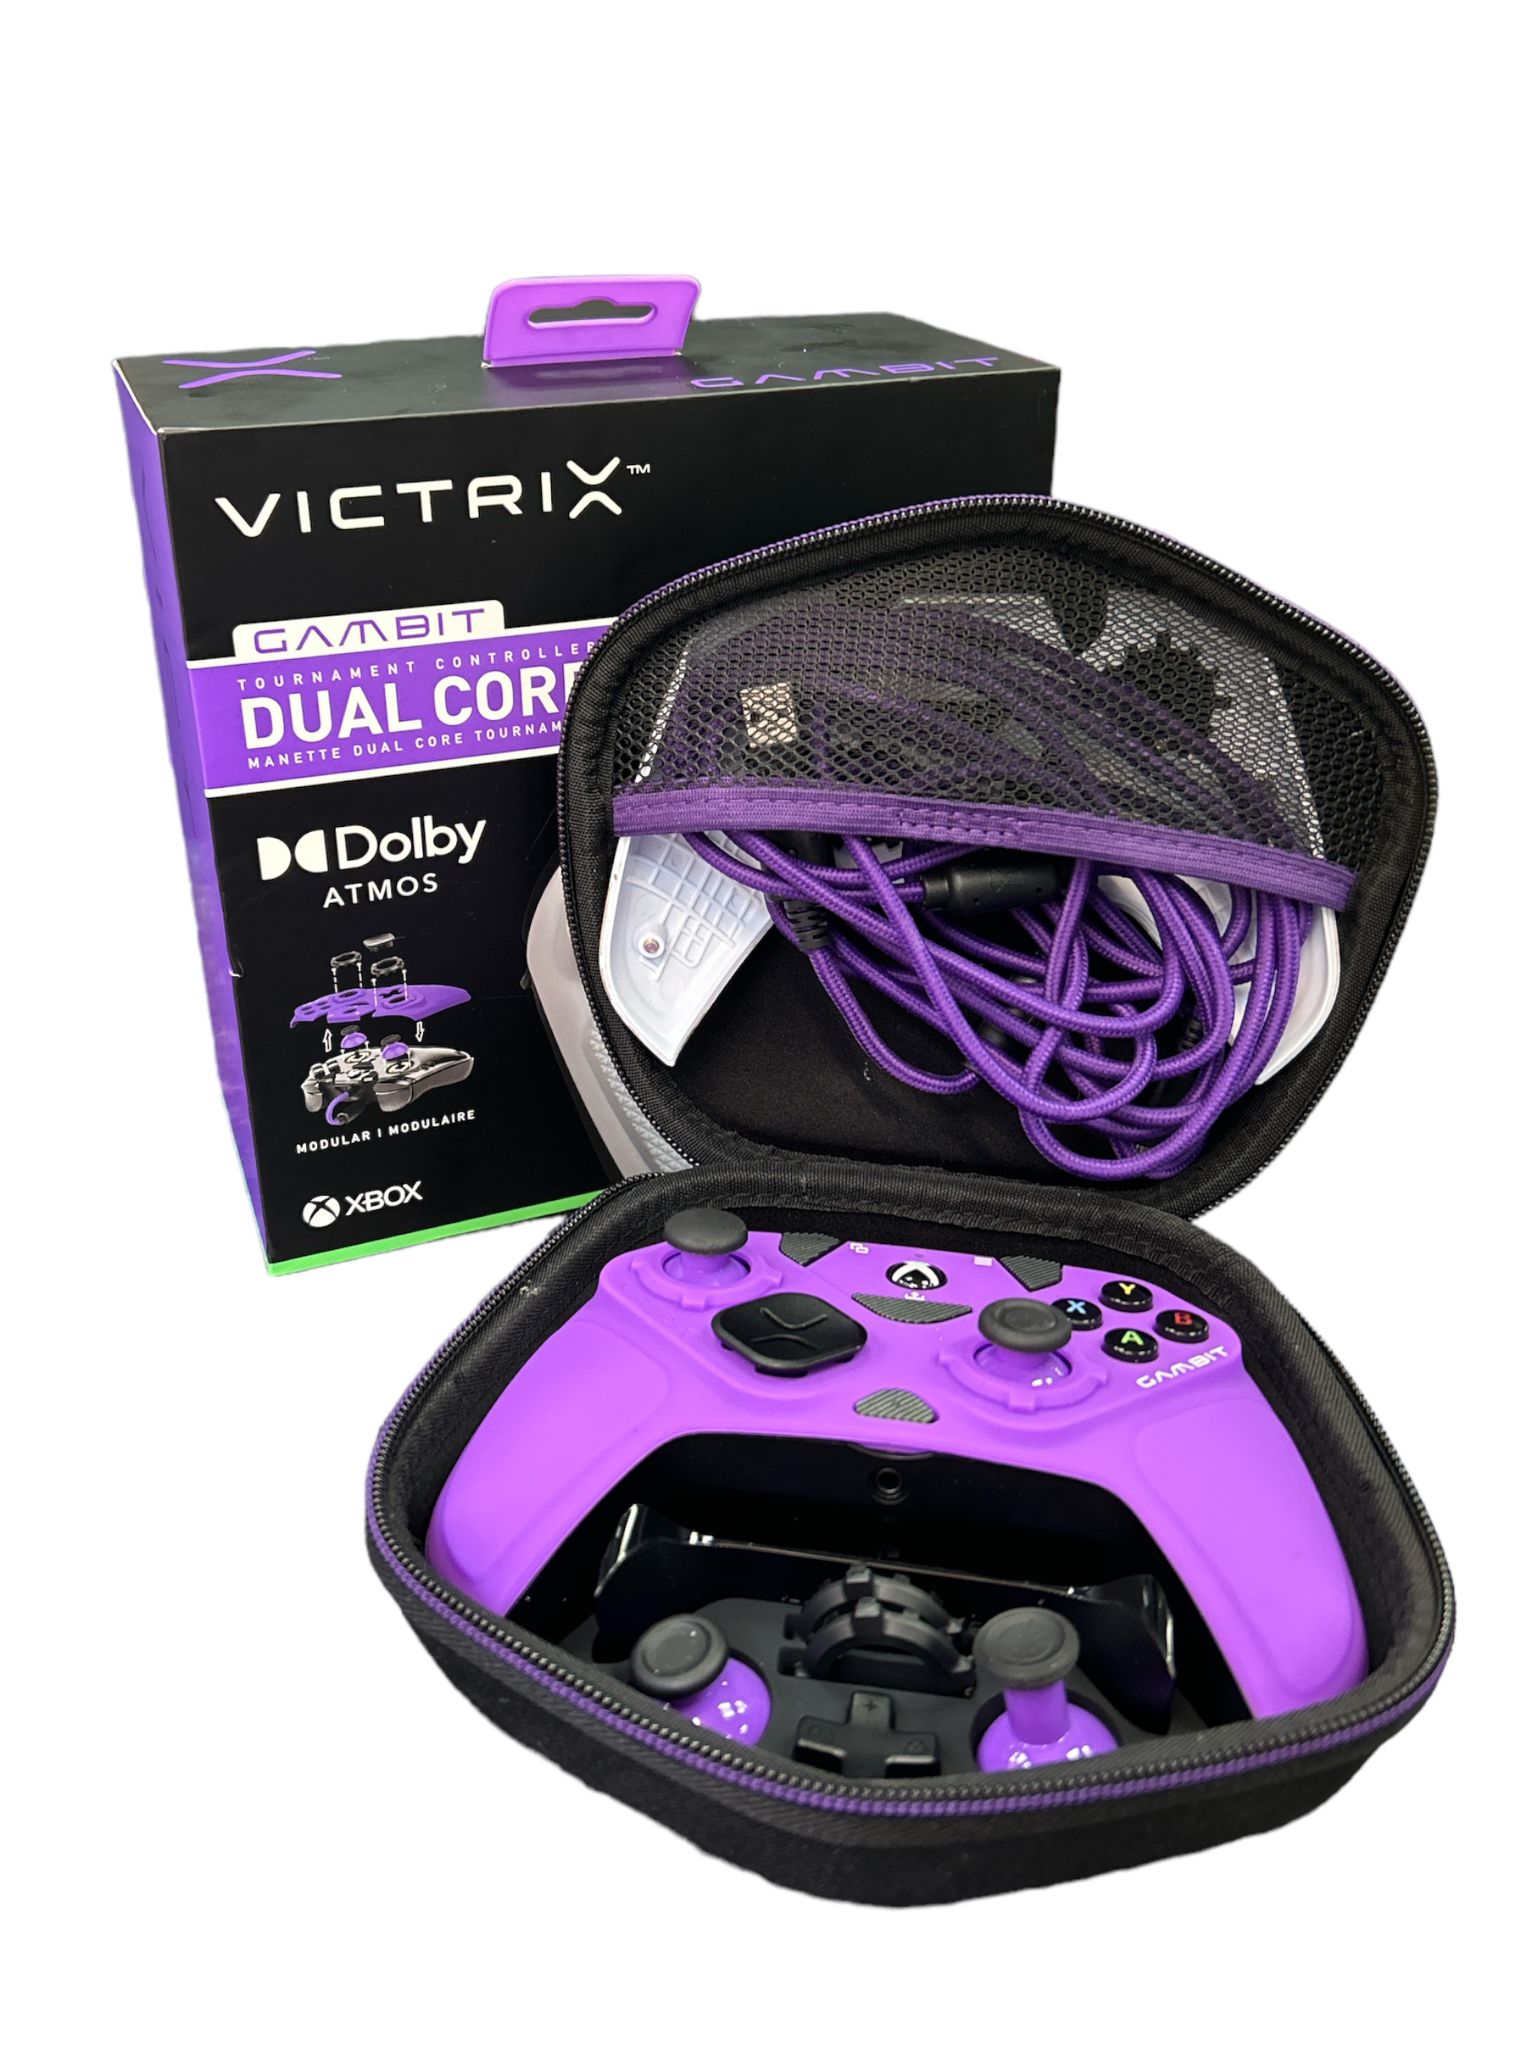 Victrix Tournament Controller - Boxed and Cased